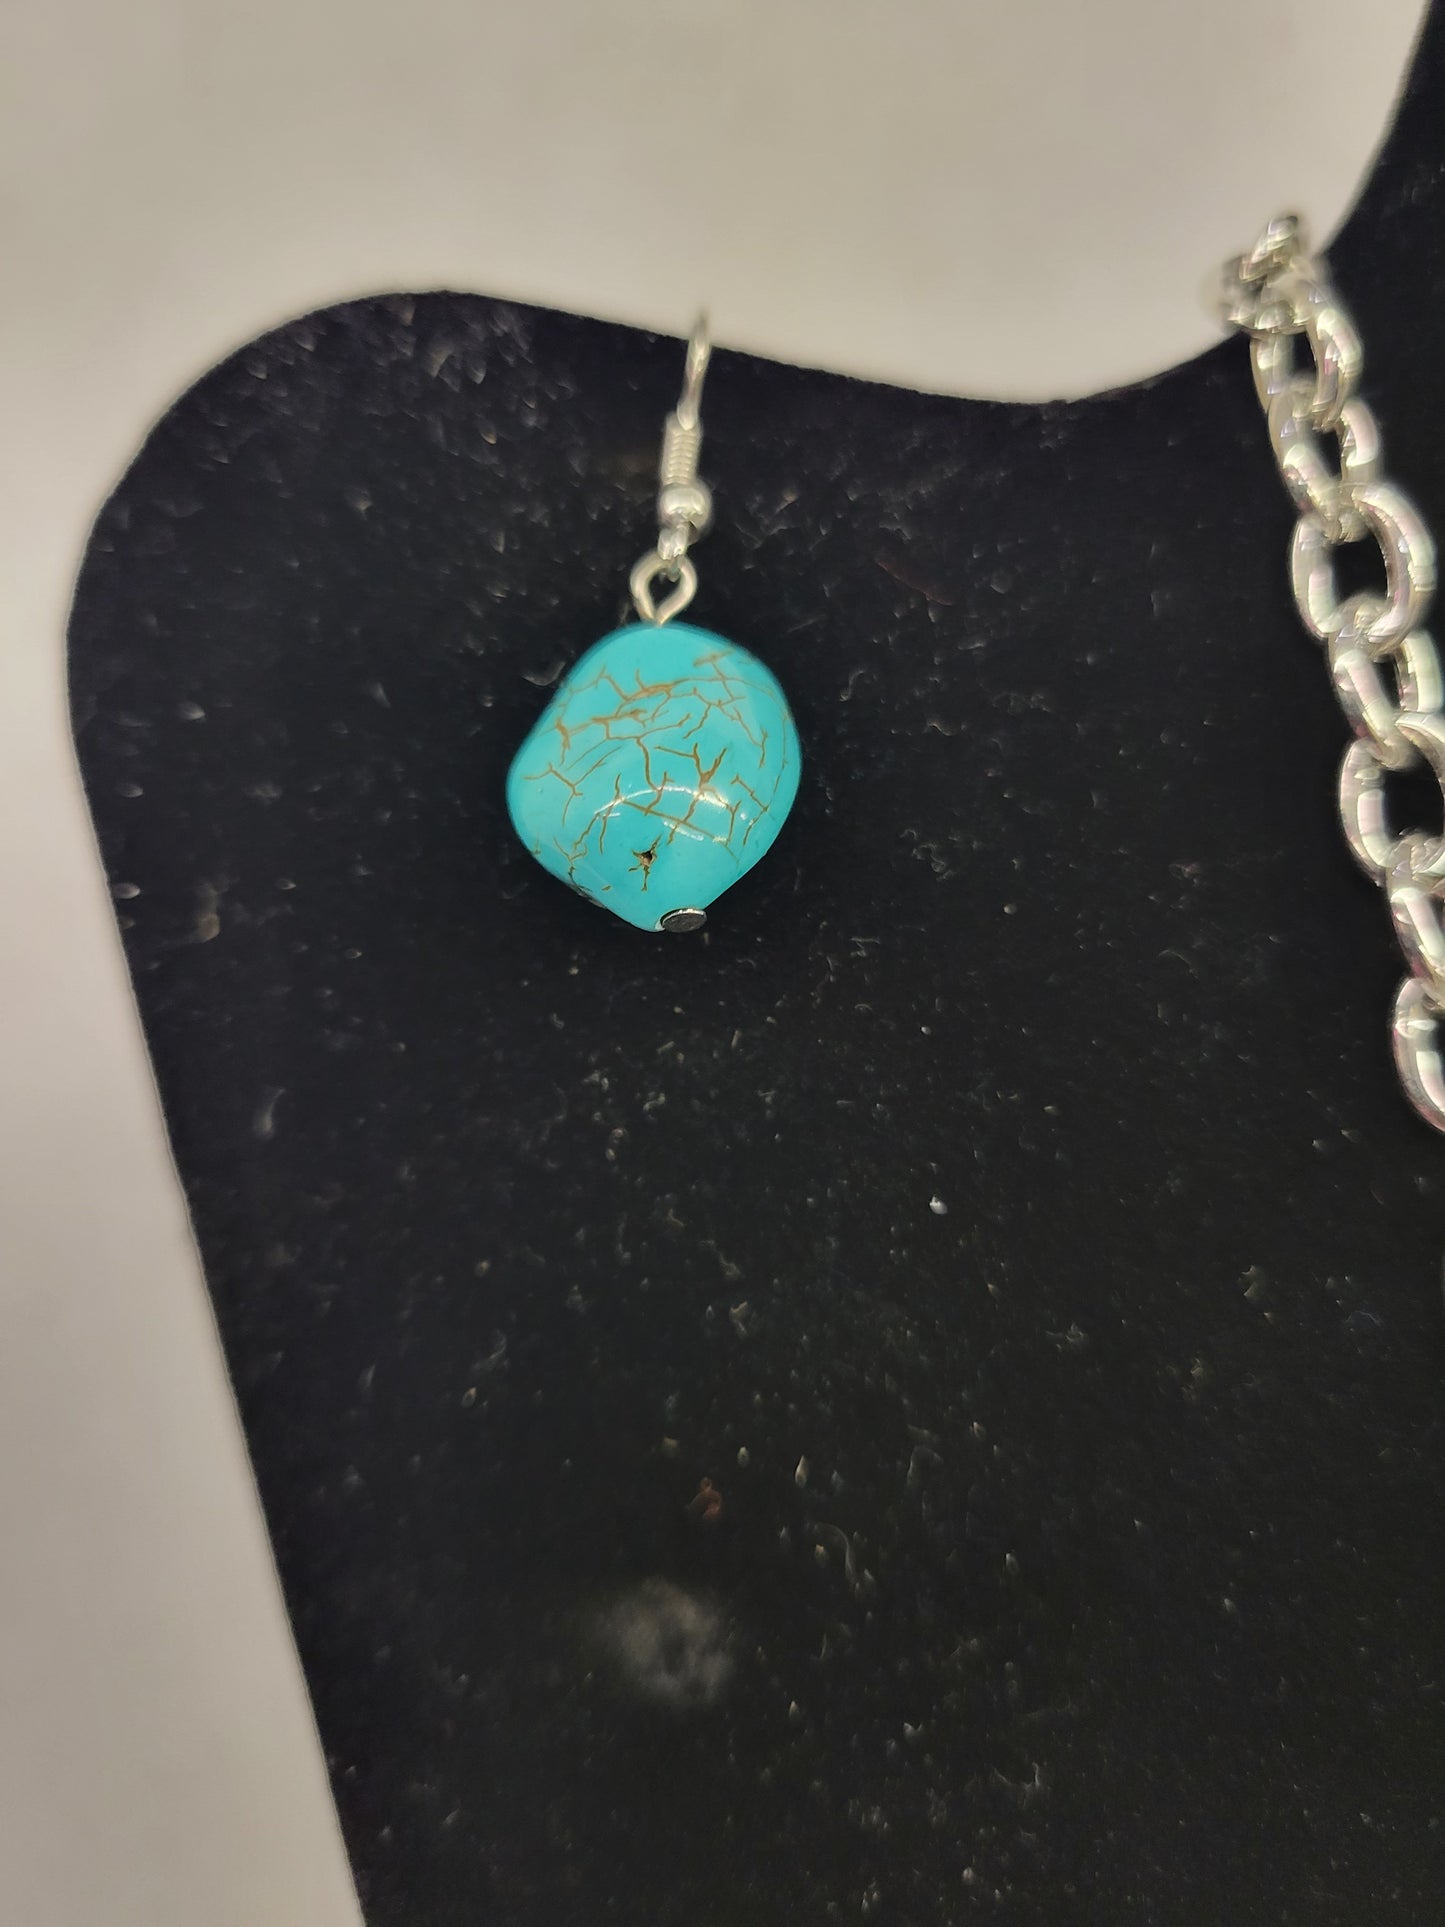 Turquoise Stone Cross Necklace and Earring Set